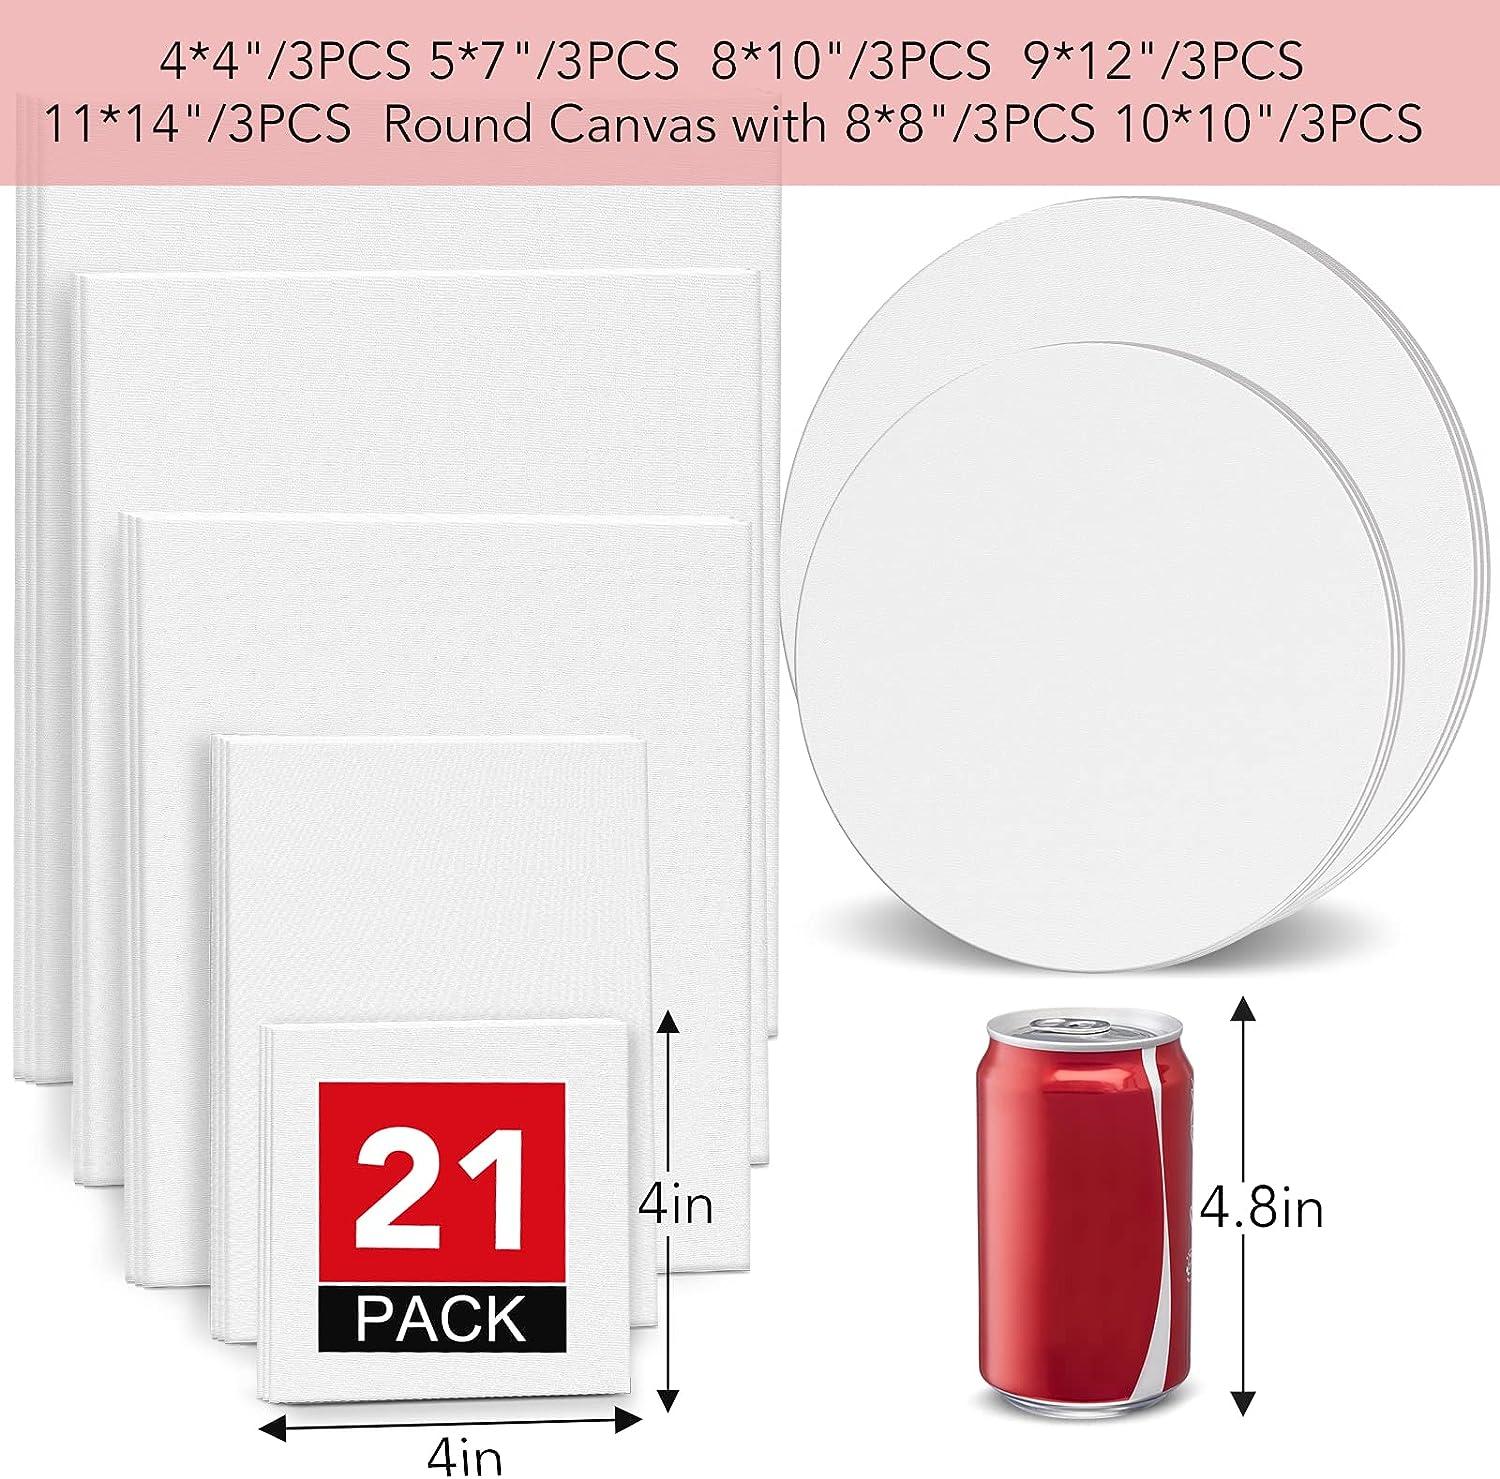 ESRICH Canvas Boards for Painting 8x10in,28 Pack Bulk Canvases for